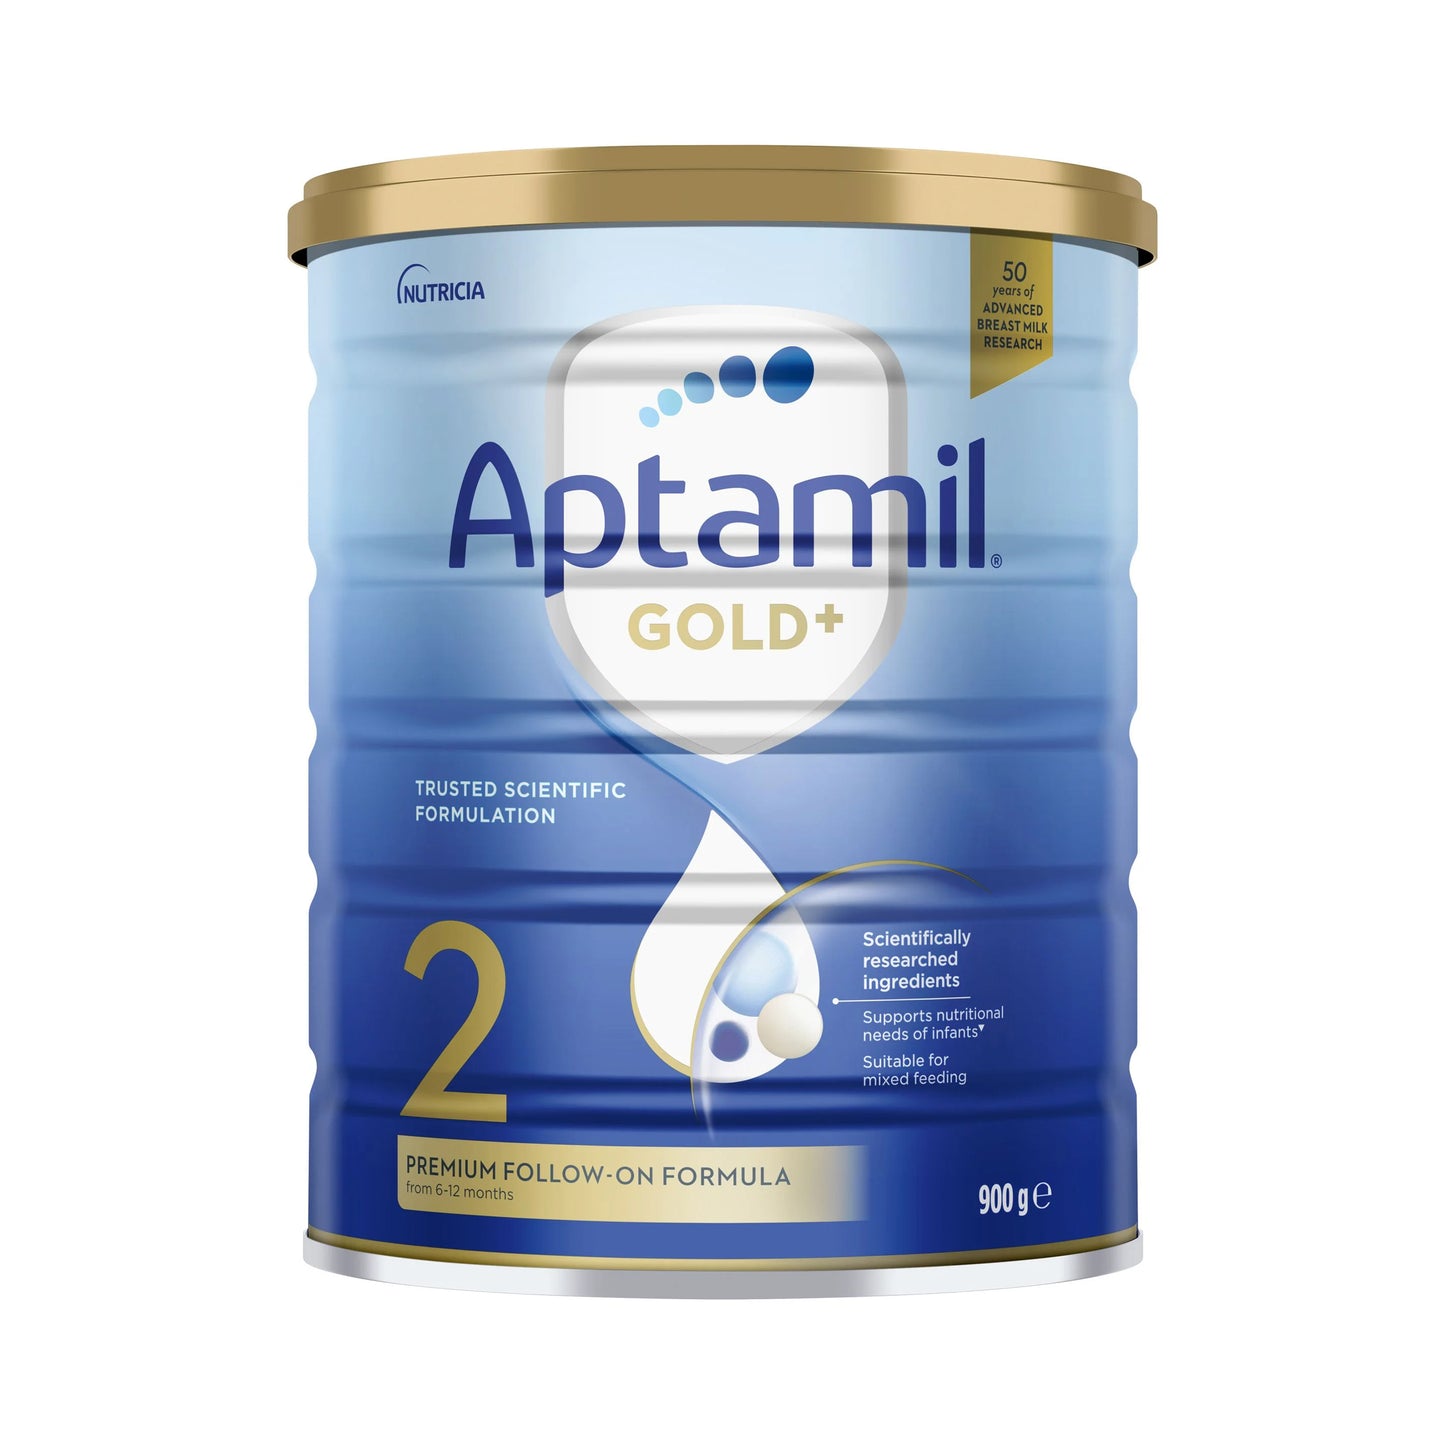 Nutricia Aptamil Gold+ 2 Premium Follow-On Formula From 6-12 Months 900g